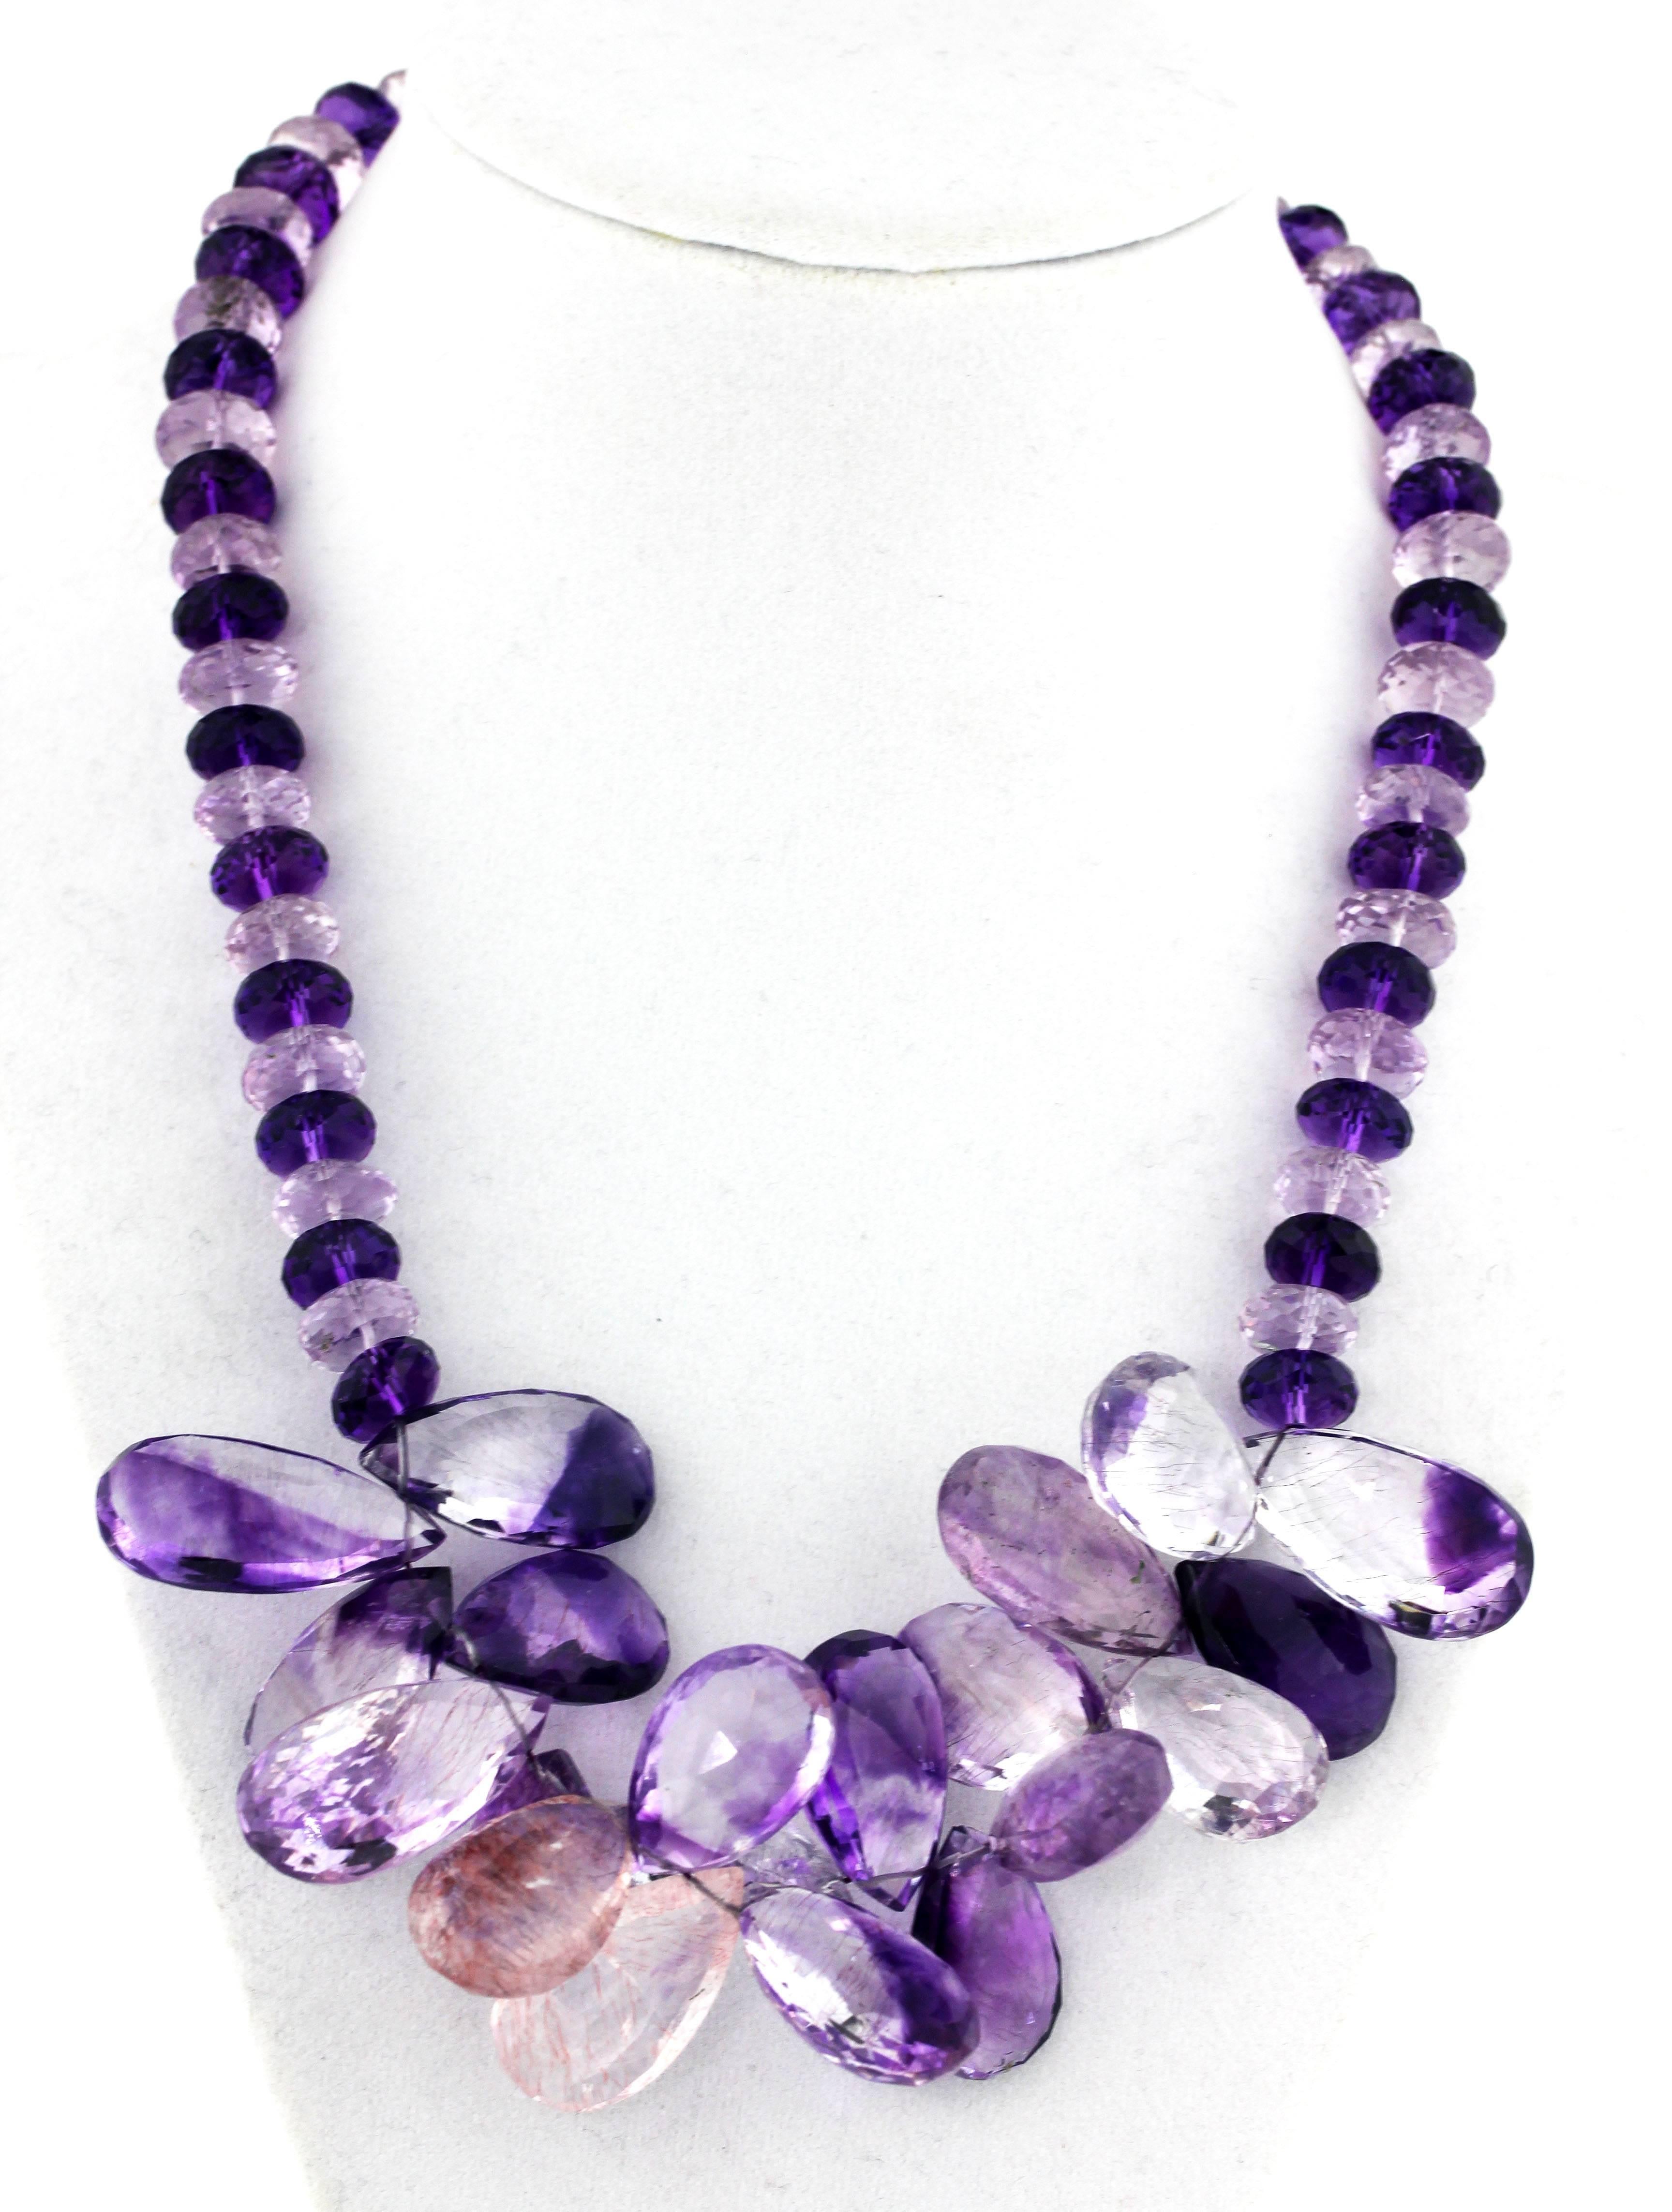 Women's Gemjunky BoHo Chic Glittering Amethysts Mixed And Matched Impressive Necklace